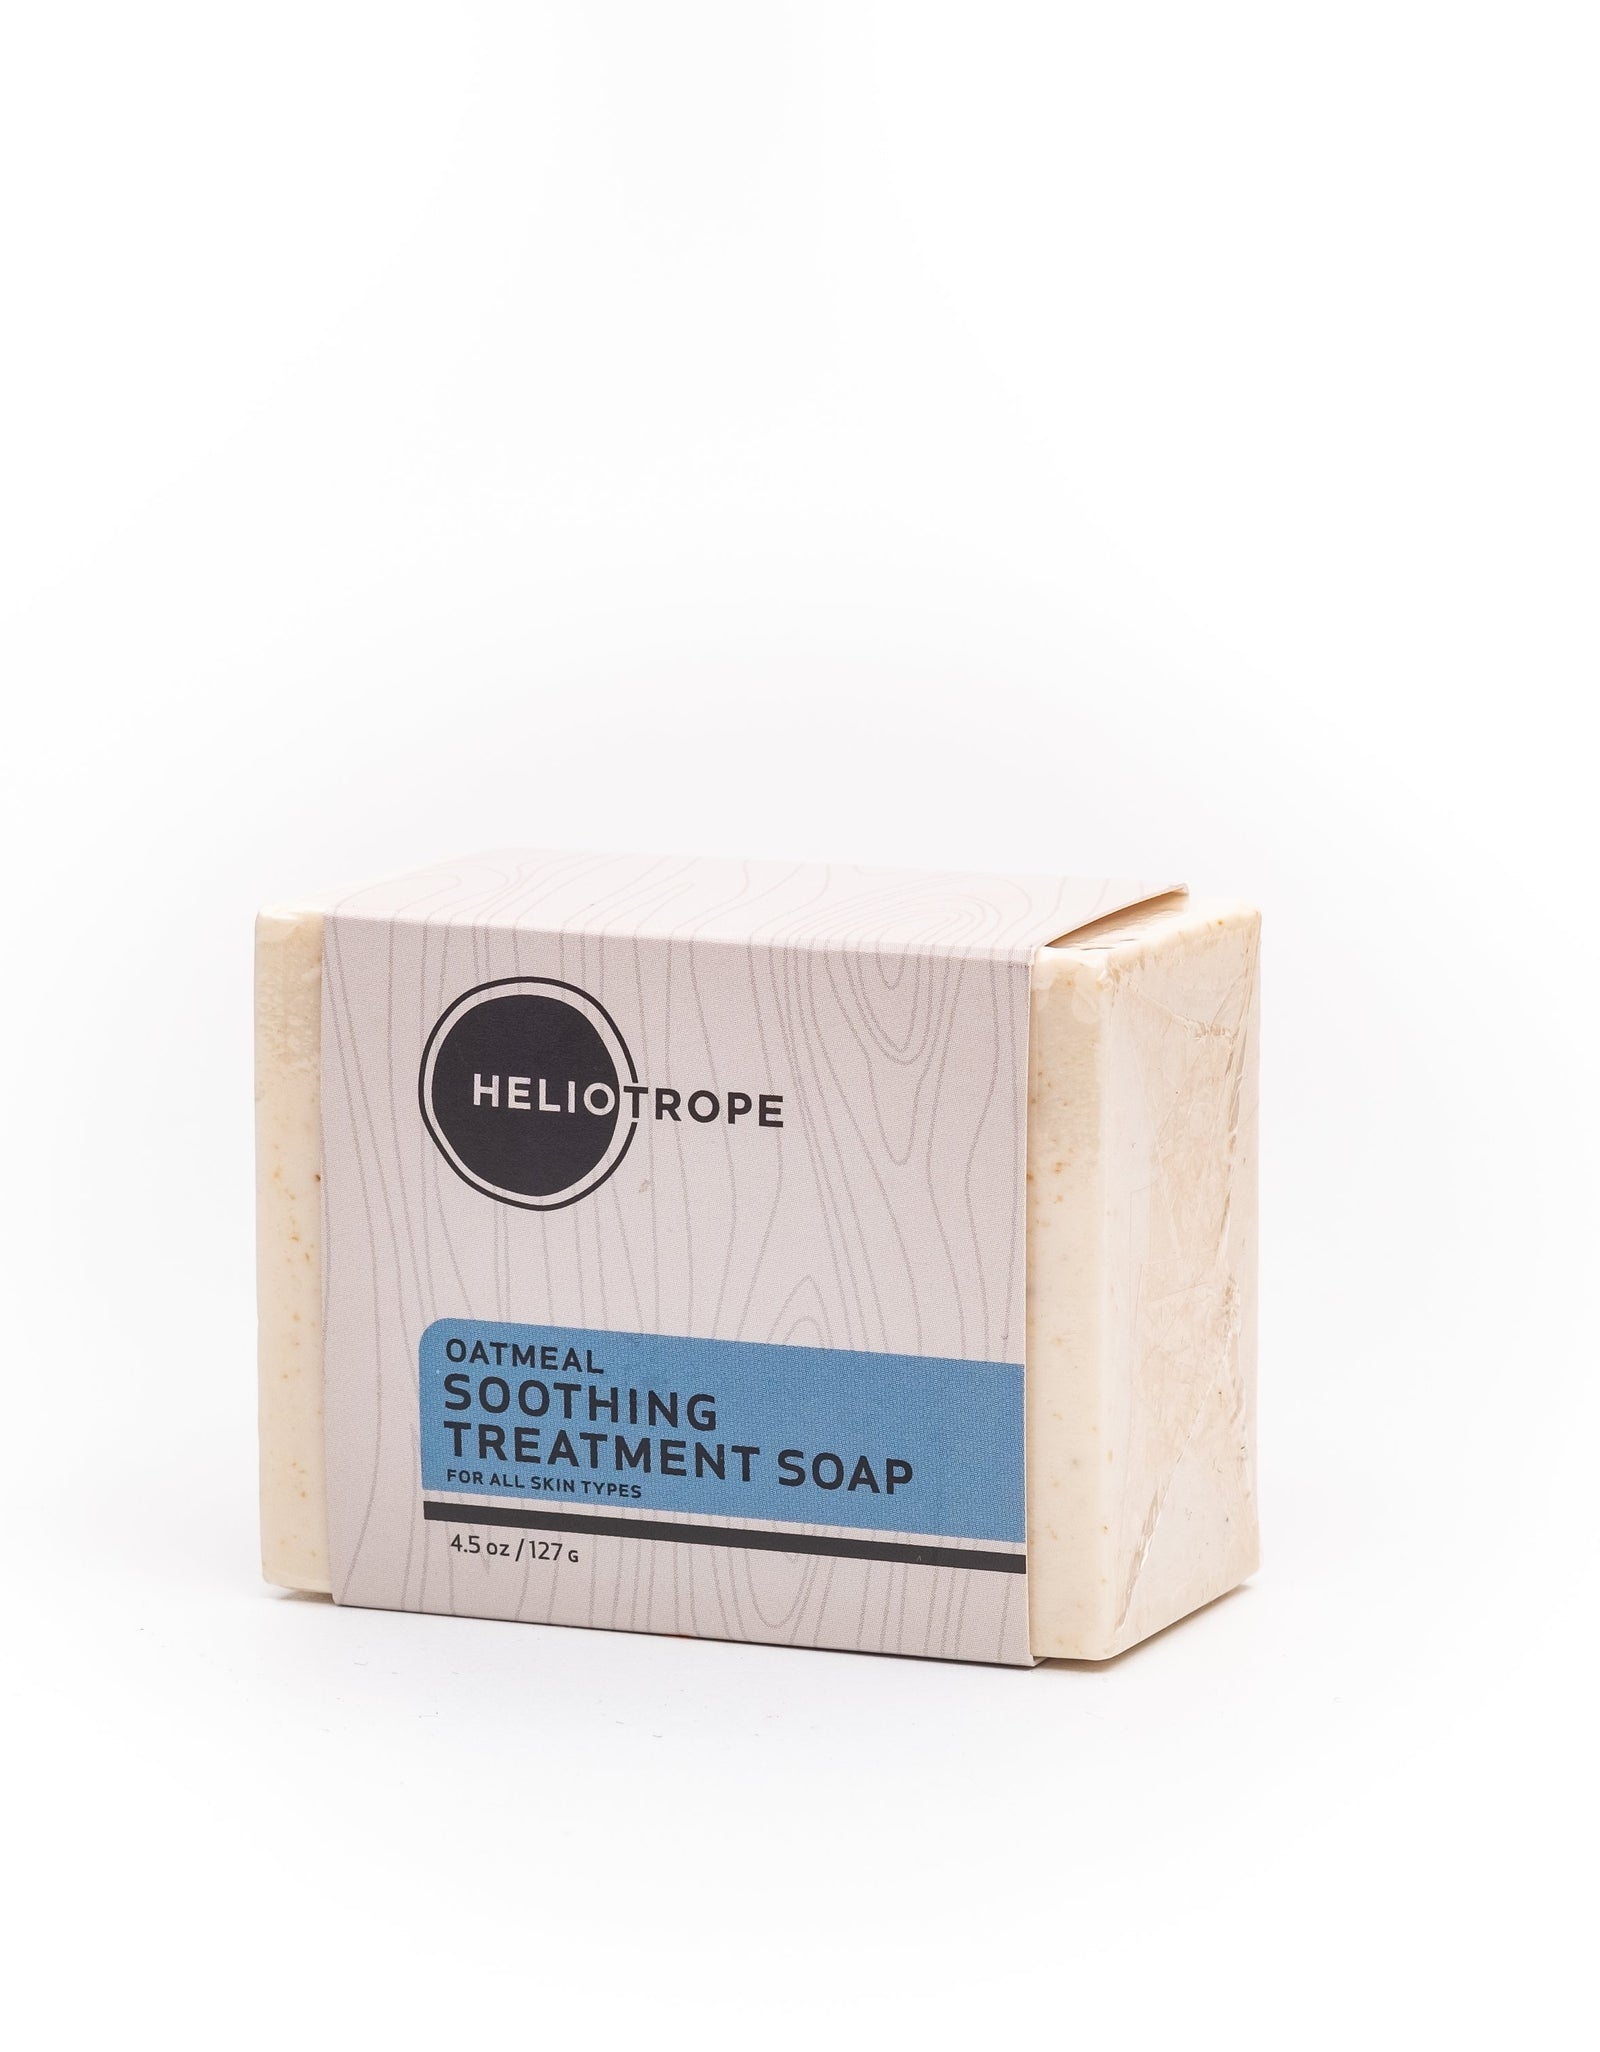 Oatmeal Soothing Treatment Soap